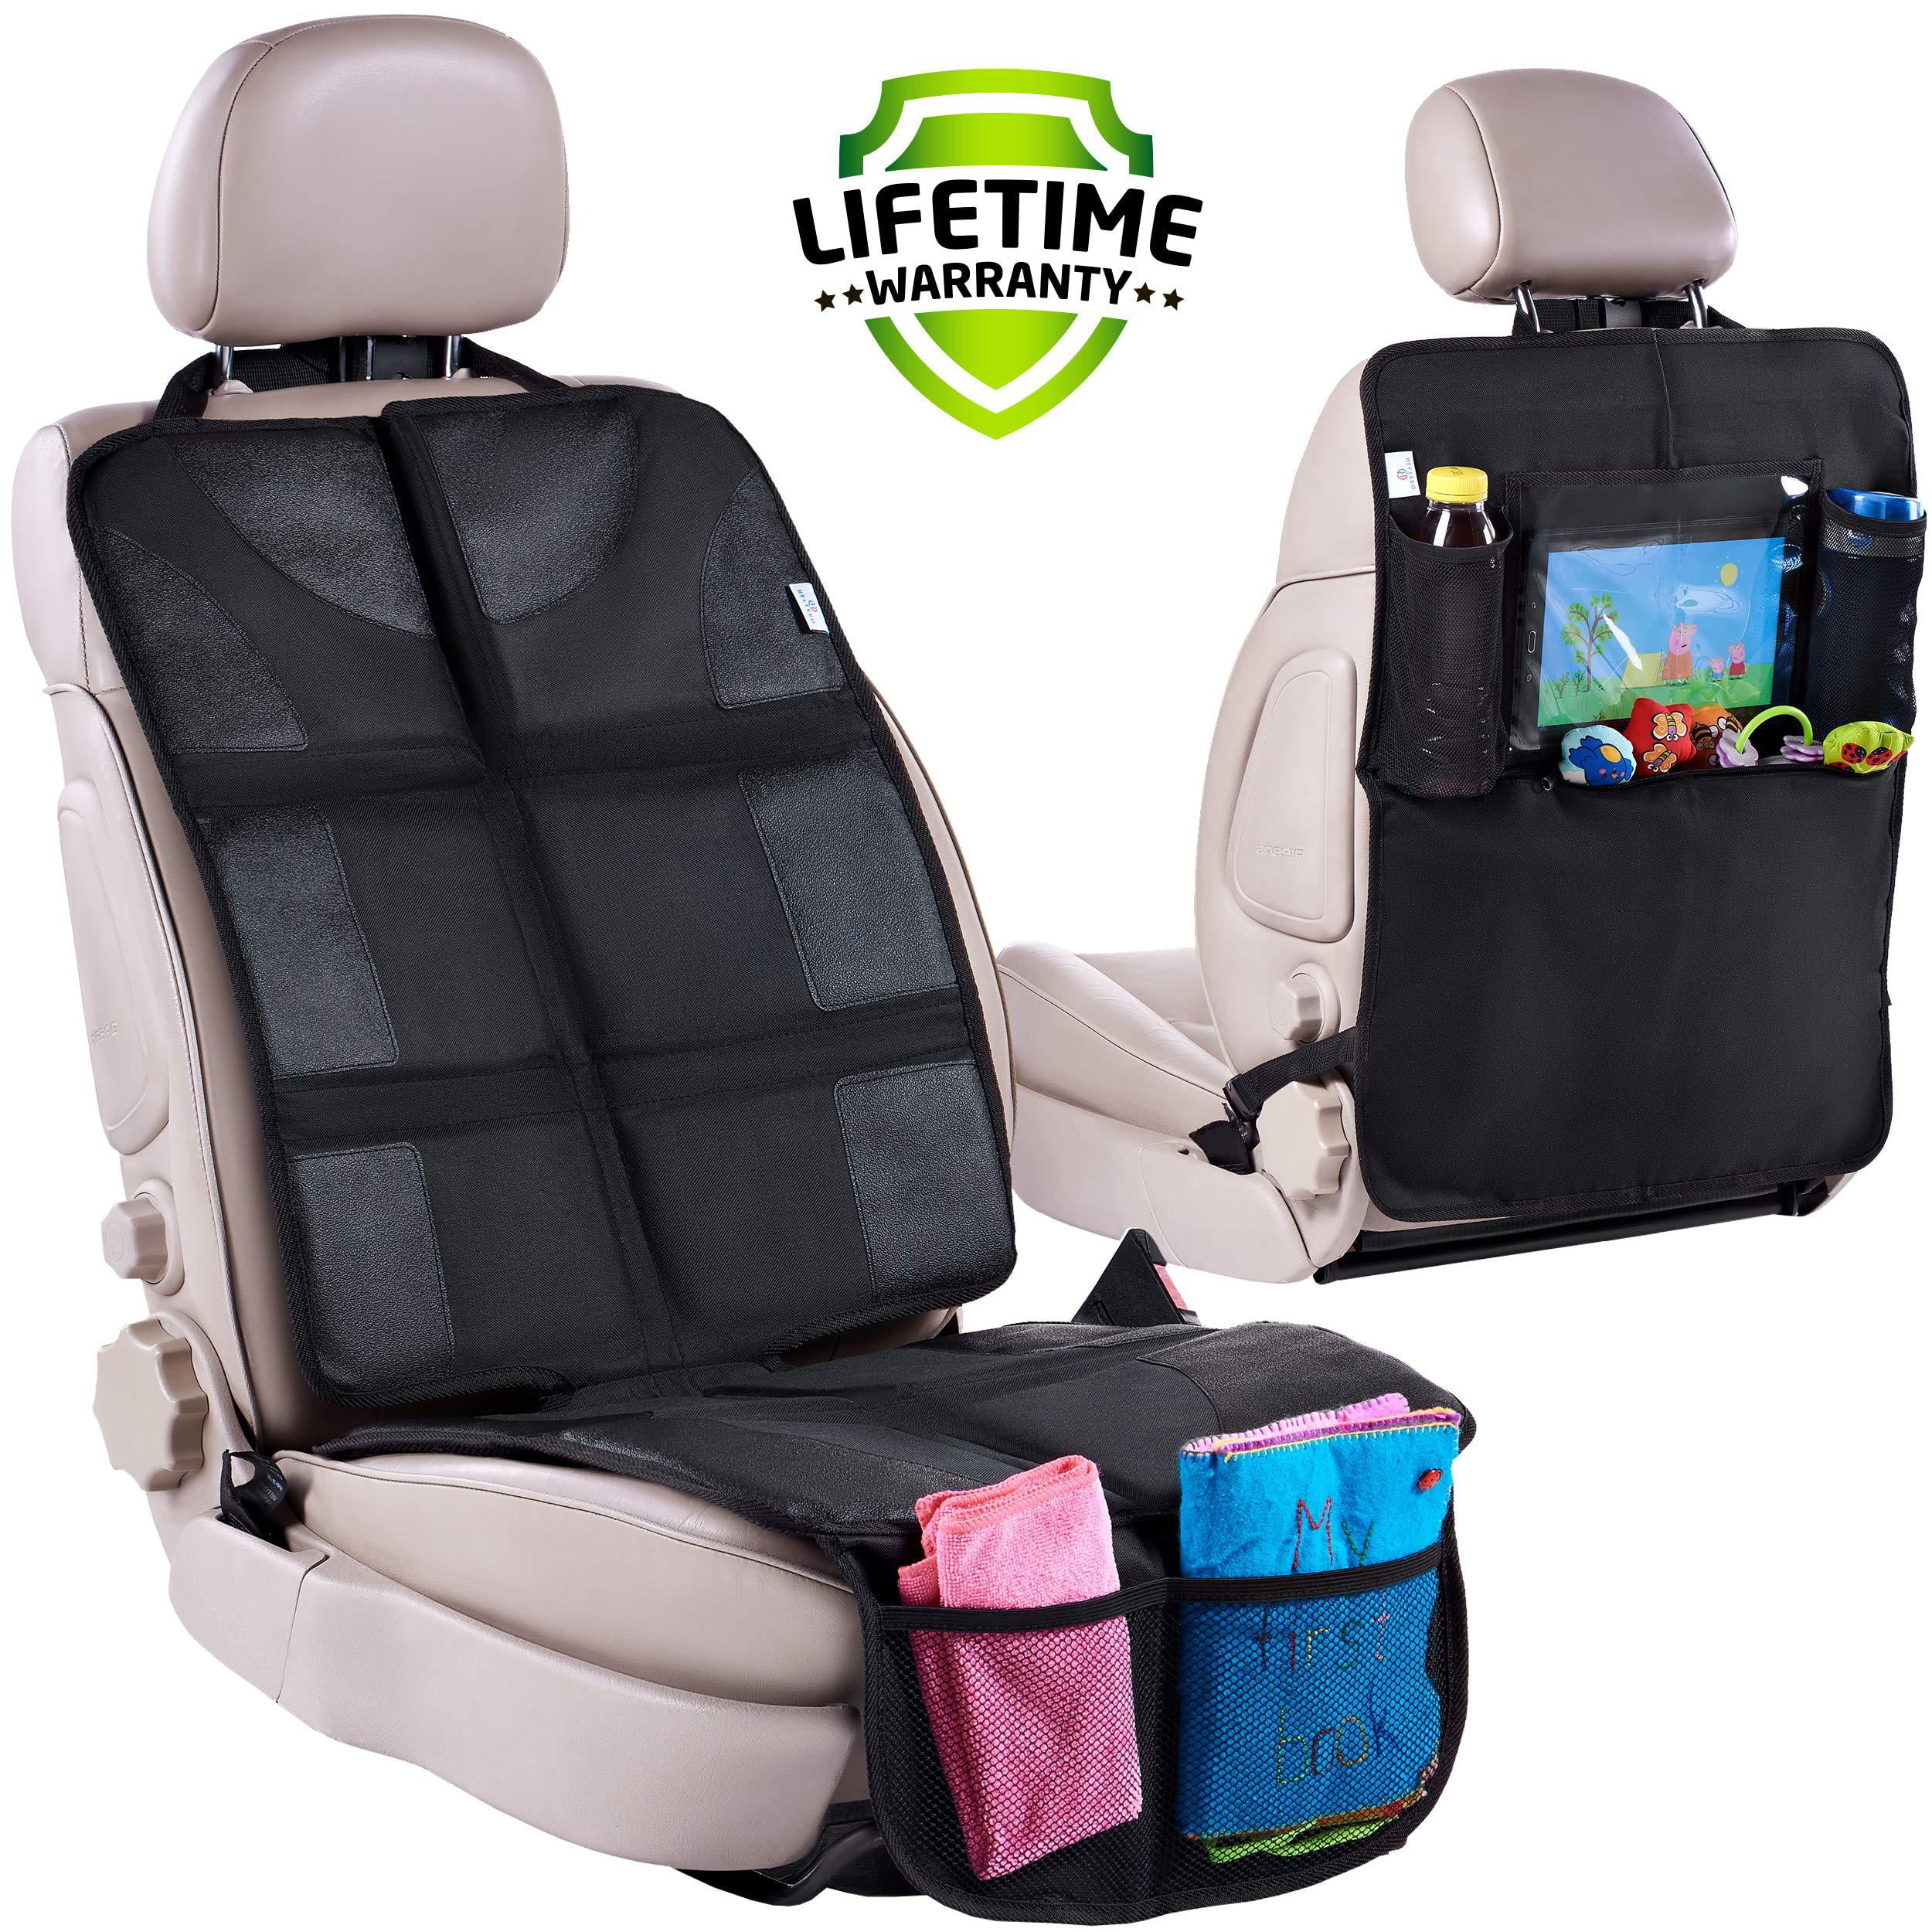 Car Protector Seat Back Cover For Children Babies Kick Mat Protects Storage Bag 